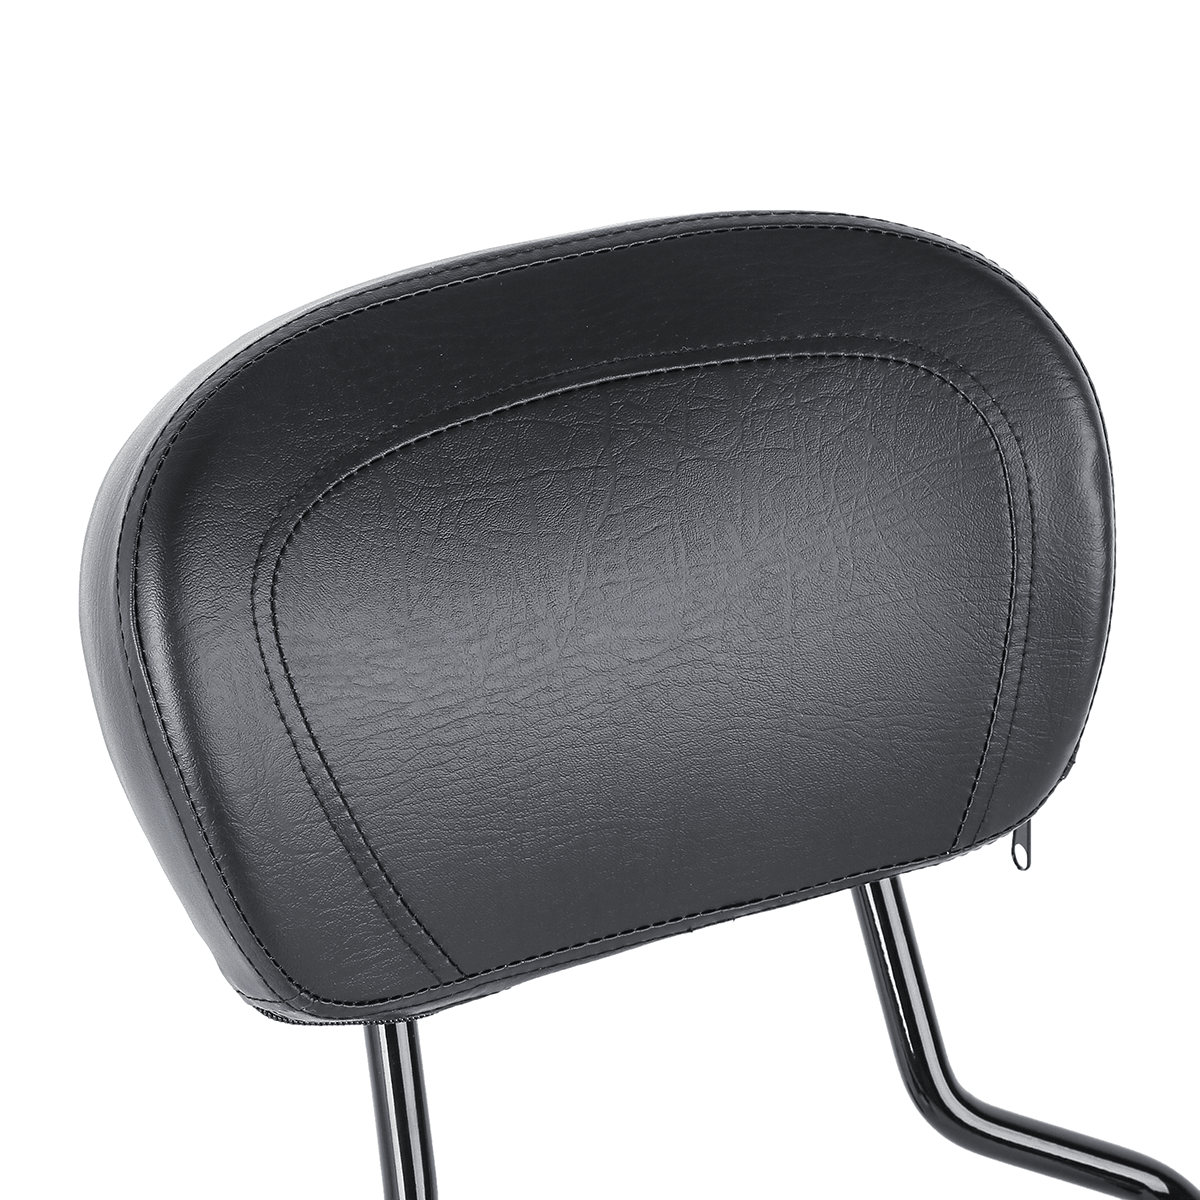 Sissy Bar Passenger Backrest Pad Fit For Harley Electra Road Street Glide 09-20 - Moto Life Products